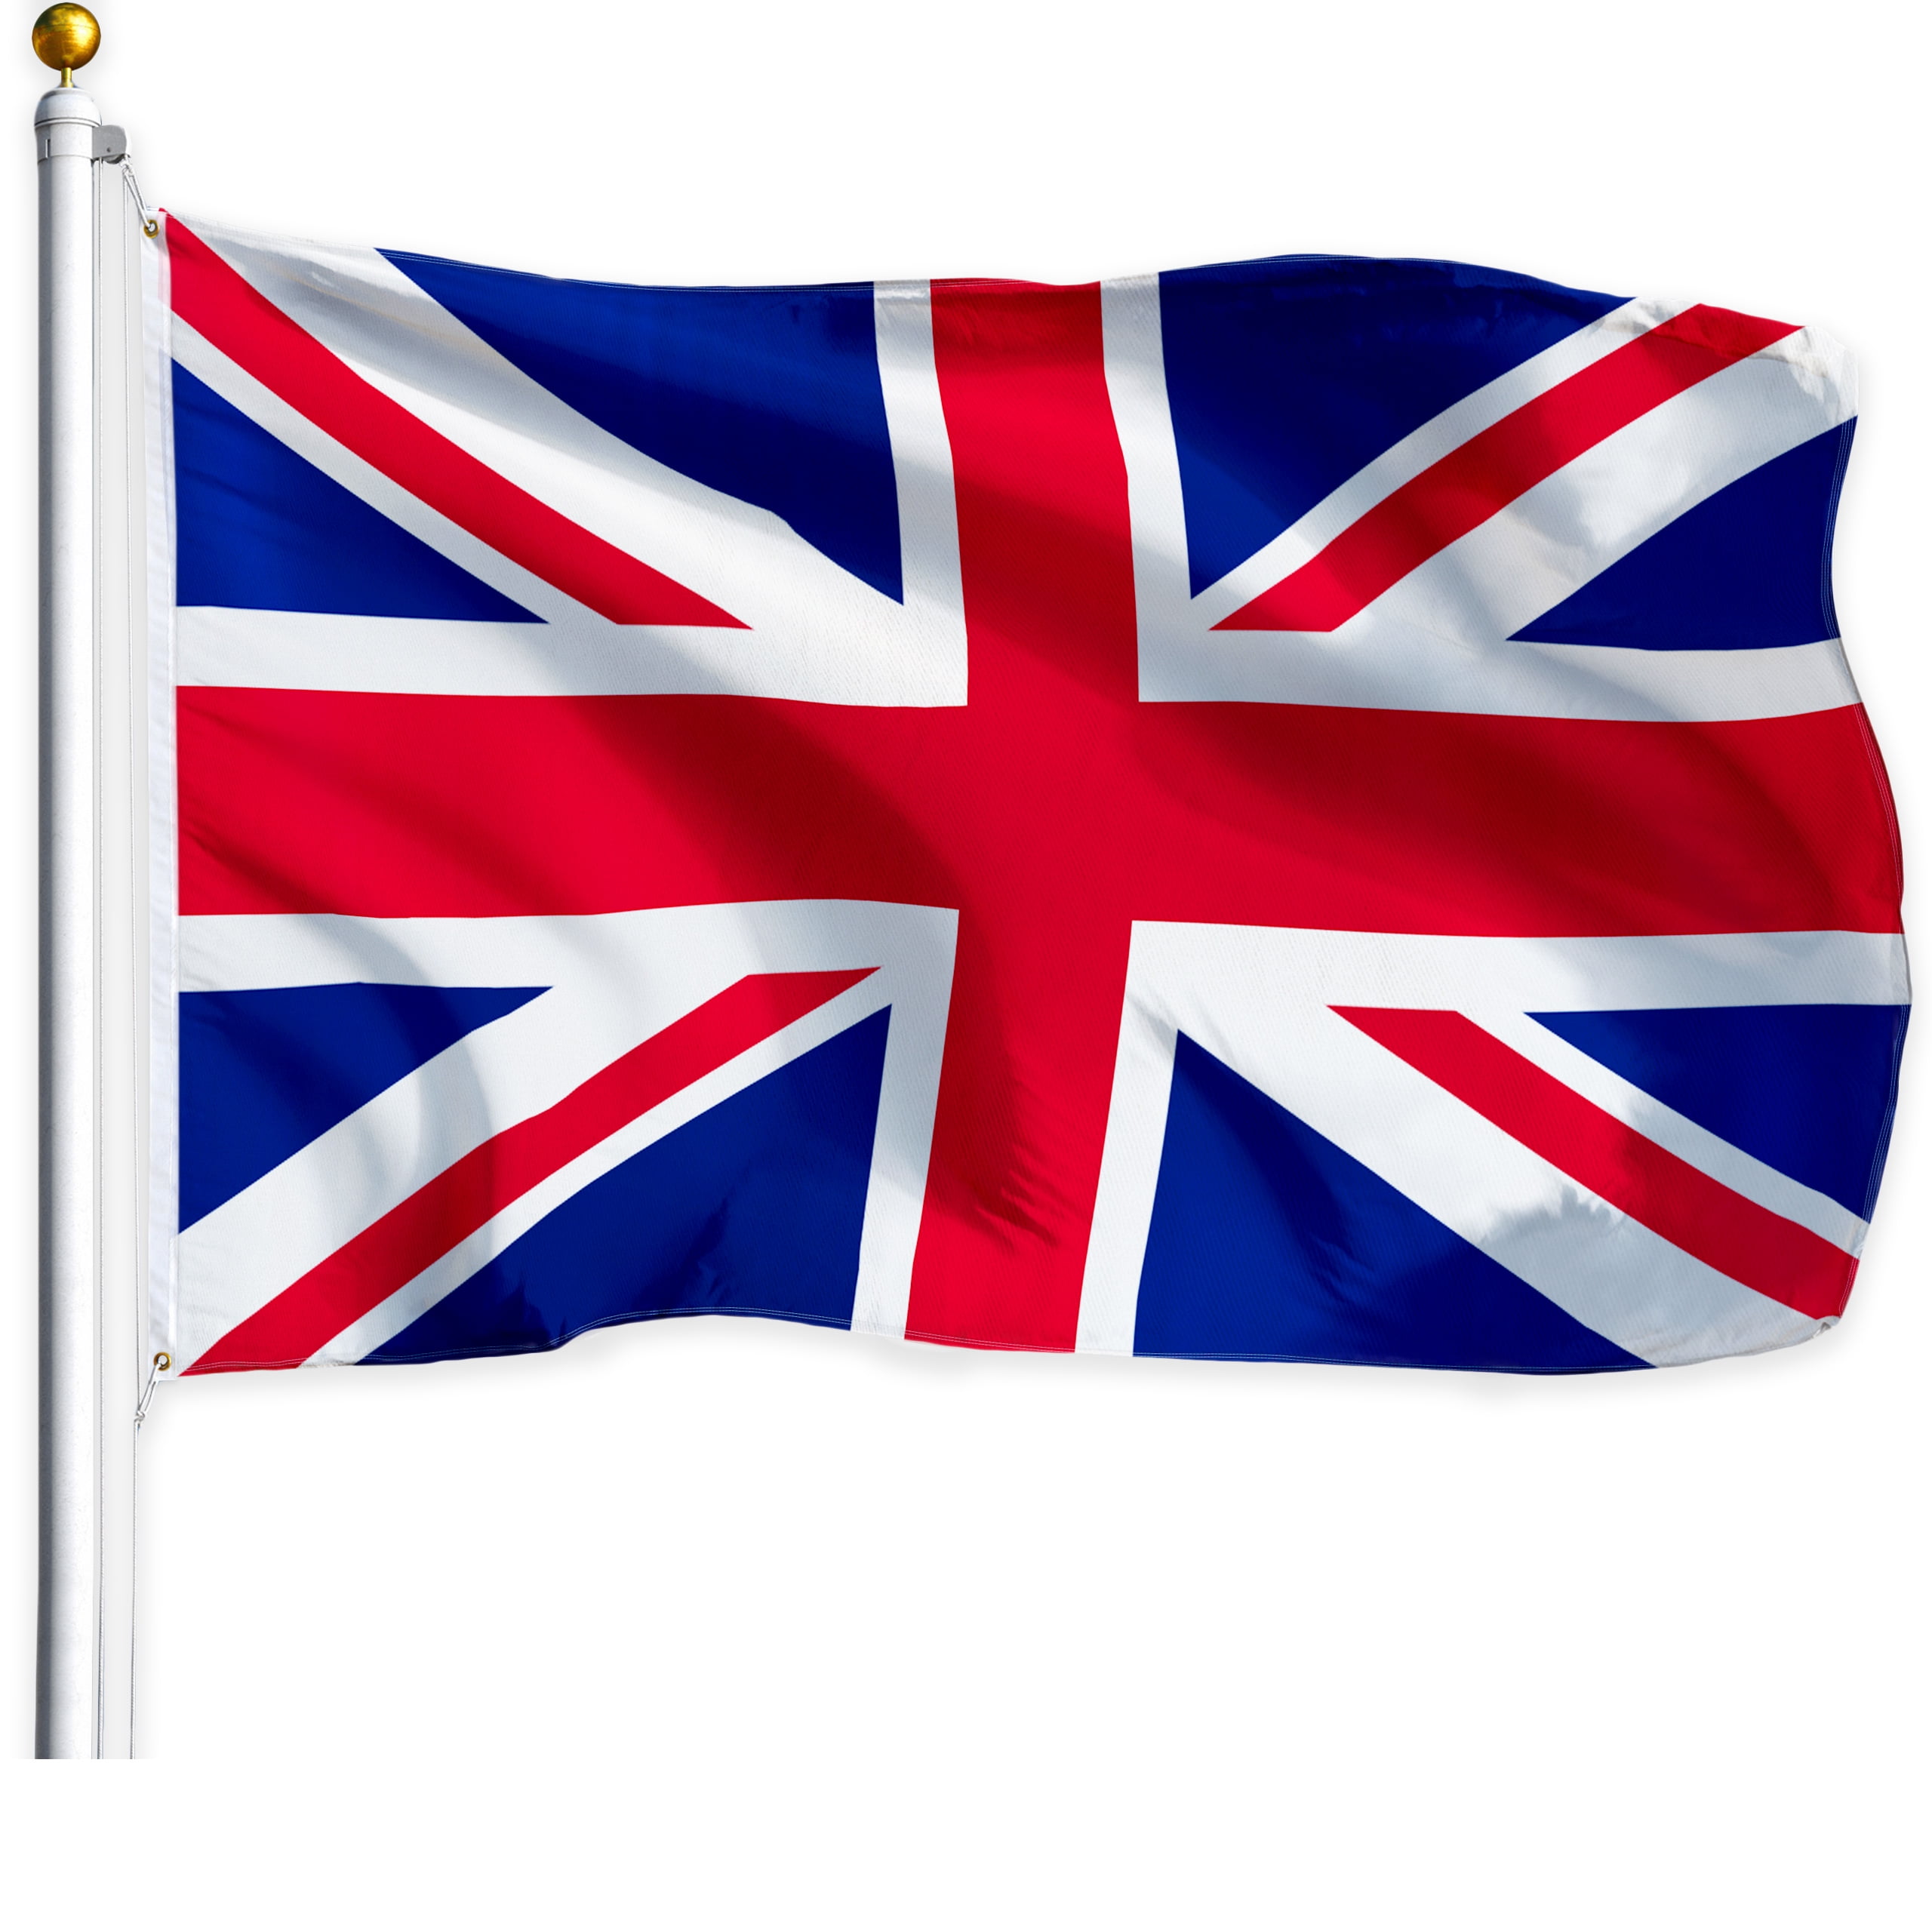 bakers  Flags Banners UK 1 great for Shops Bakery flags 